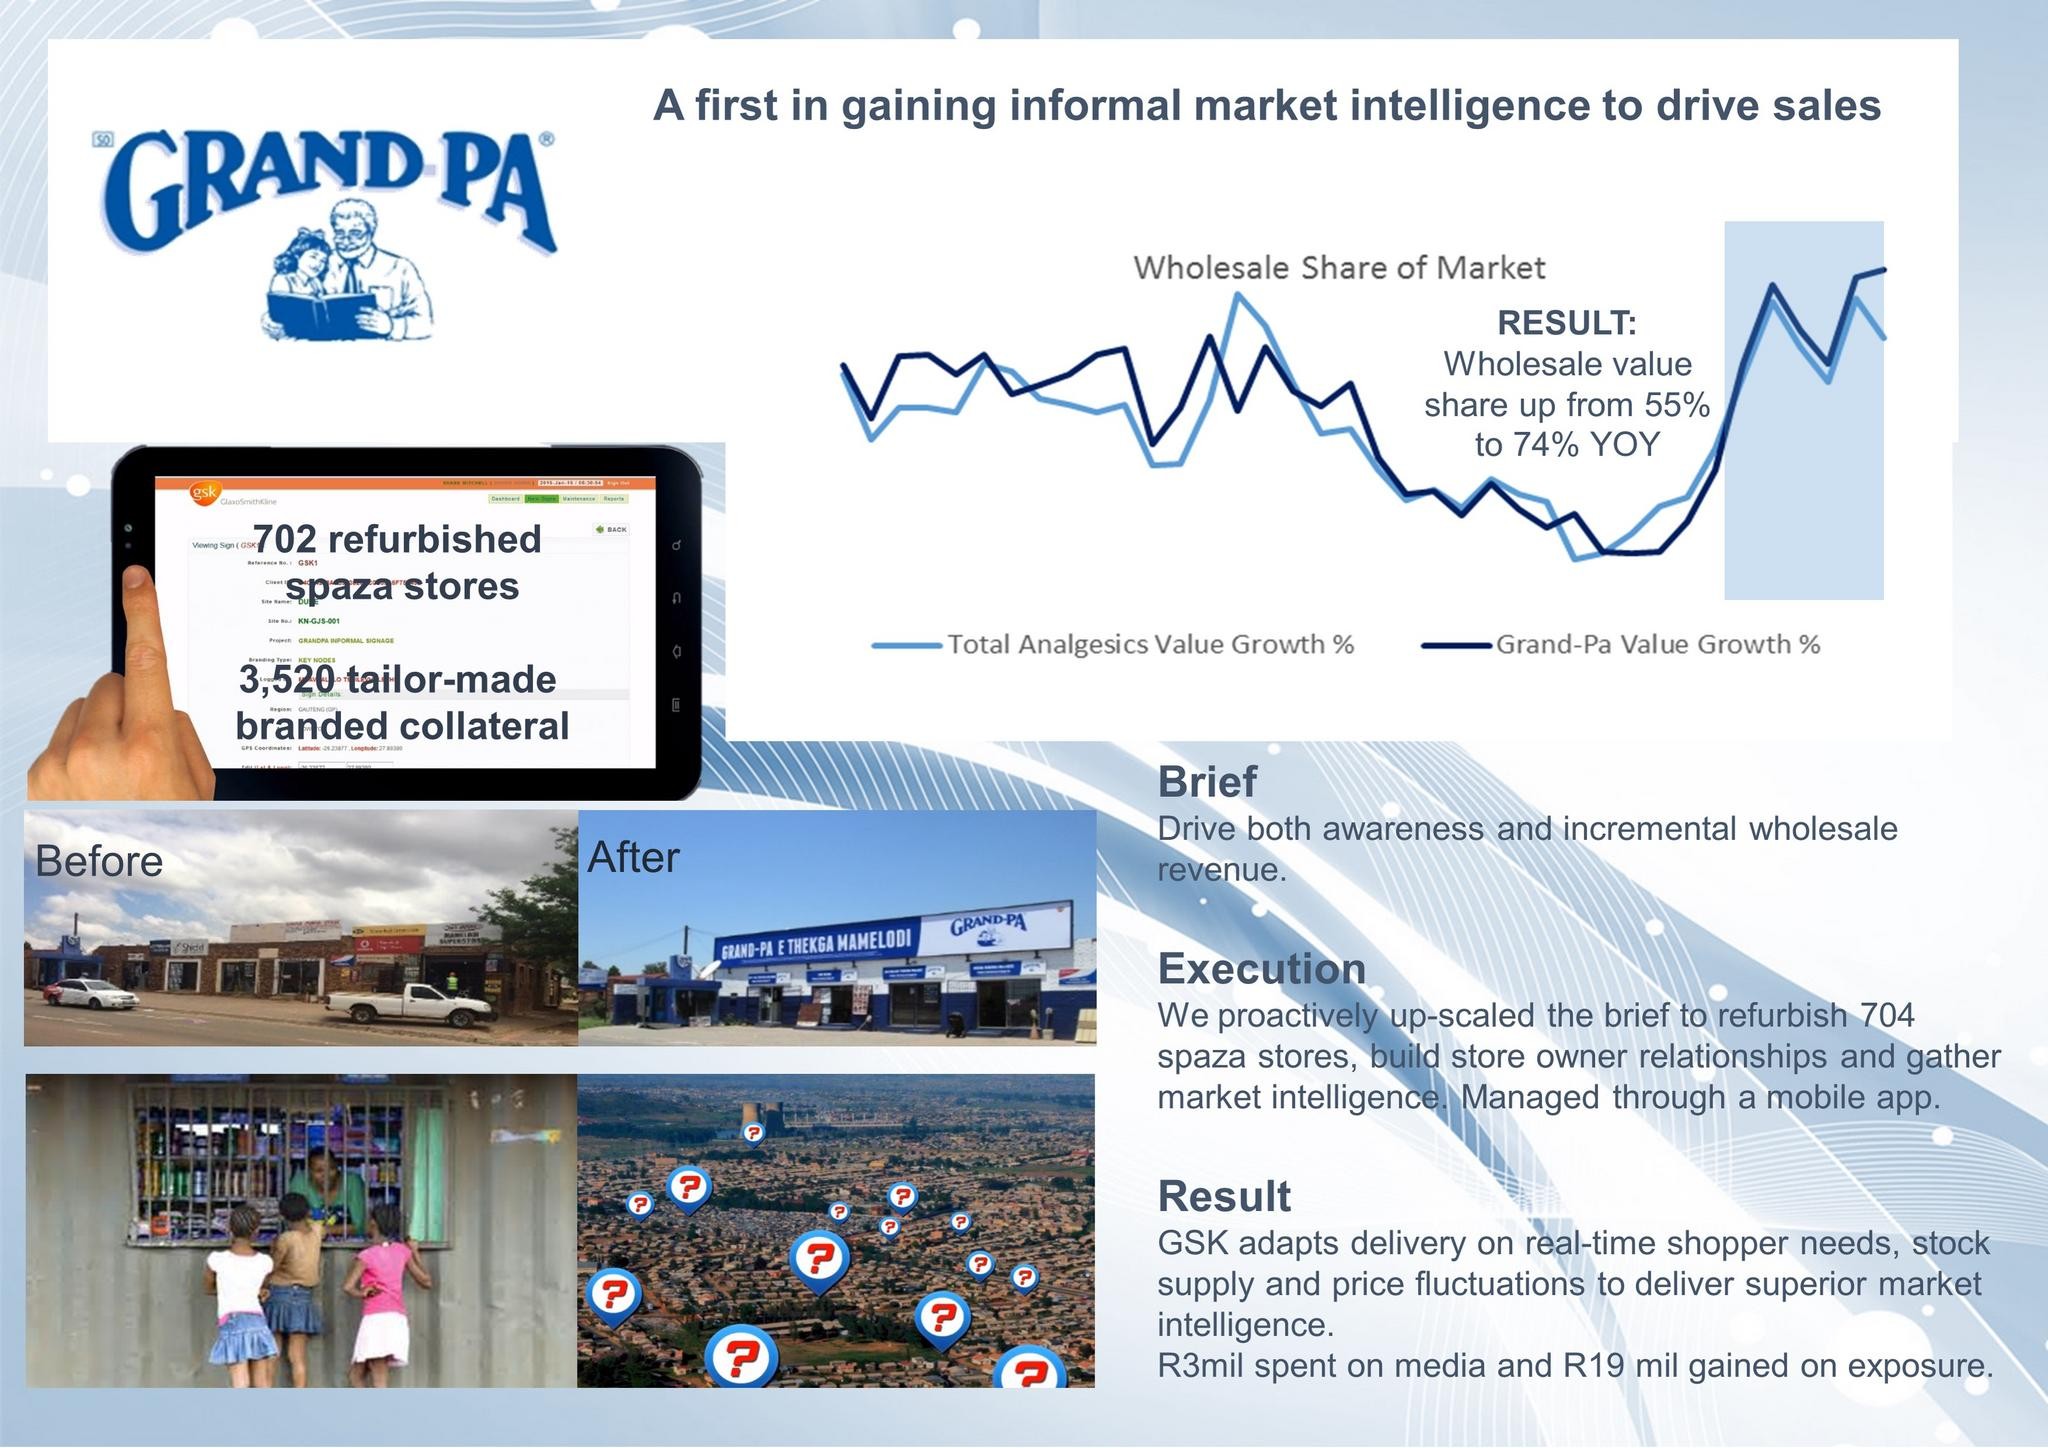 A FIRST FOR INFORMAL TRADE MARKET INTELLIGENCE